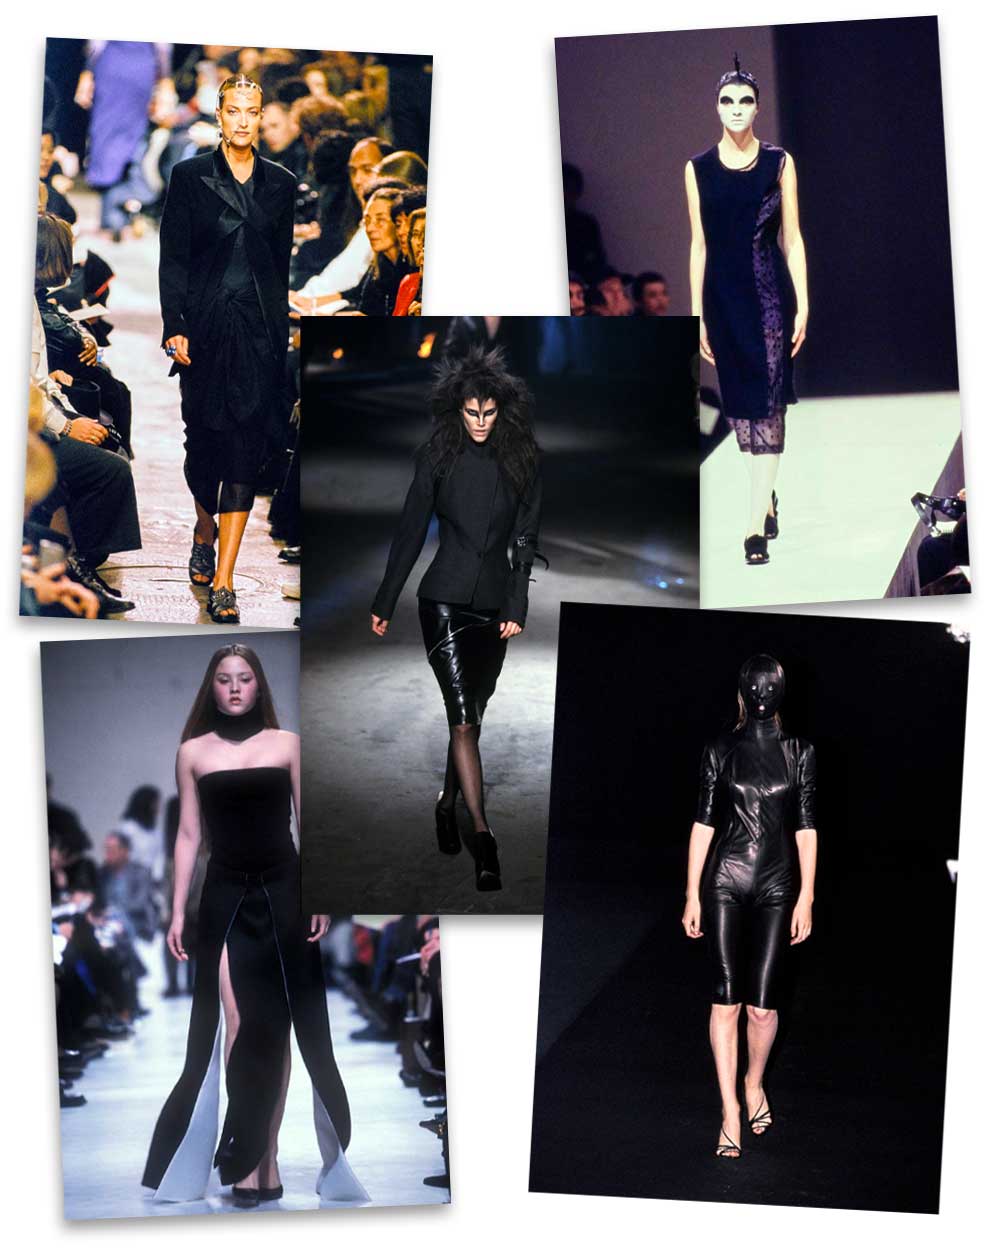 Goth Style on Fashion Show and Runways in the 90s